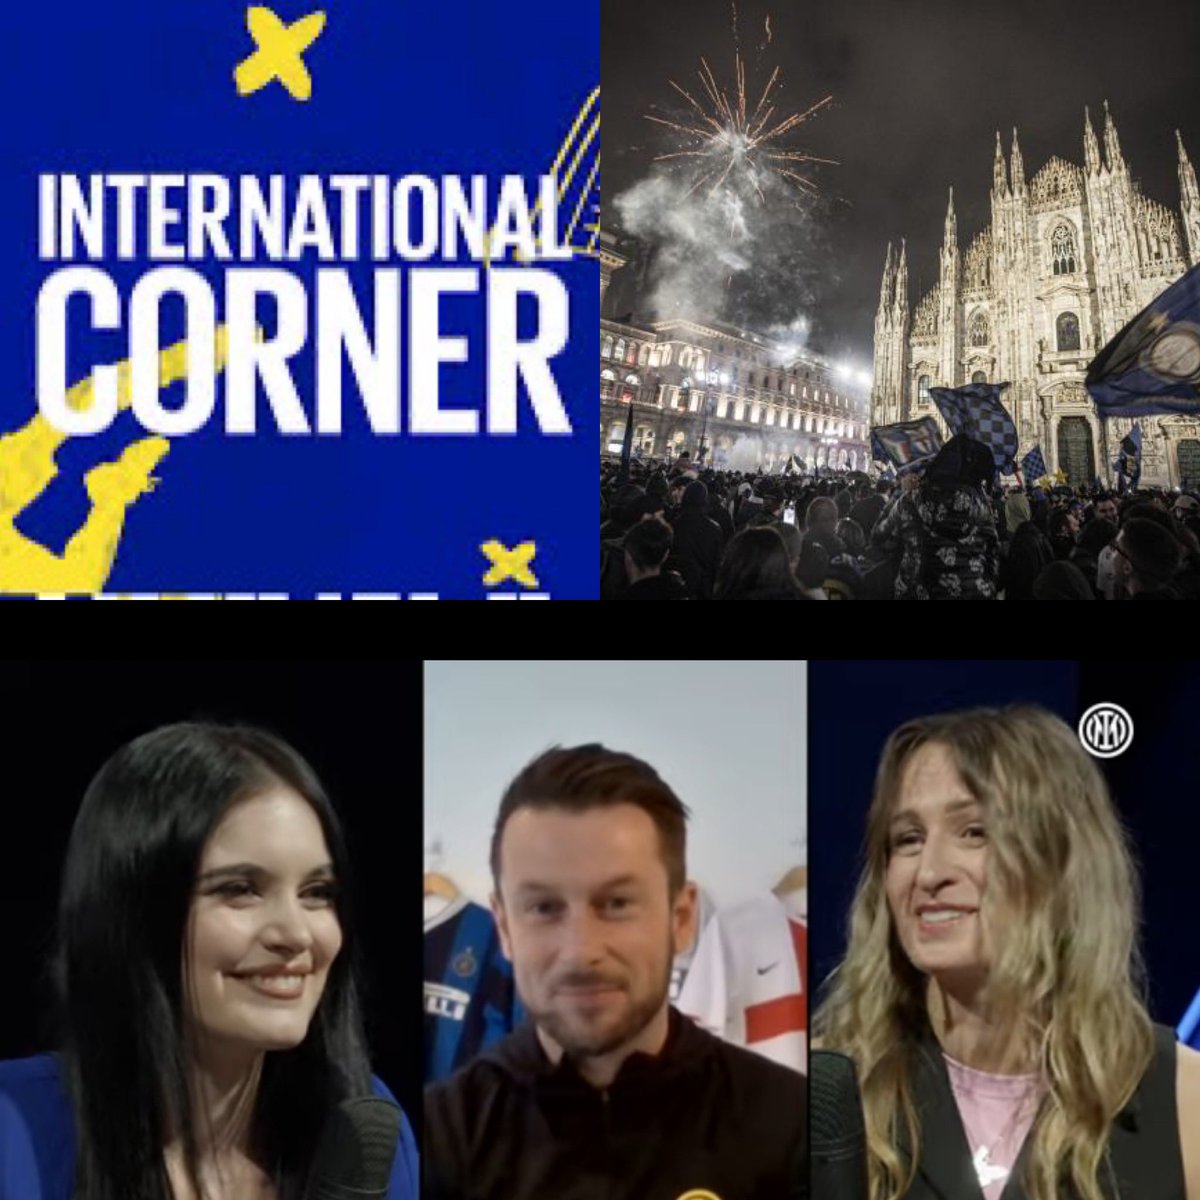 @Inter ‘International Corner’ is back ⚫️🔵🌎 This week myself, @AccotoGaia and Elena Longari talk reminisce over the last couple of weeks and @Inter_en Scudetto triumph ⭐️⭐️🇮🇹 #Inter Have a watch on @YouTube ⬇️ youtu.be/0y8OI2A6keY?si…